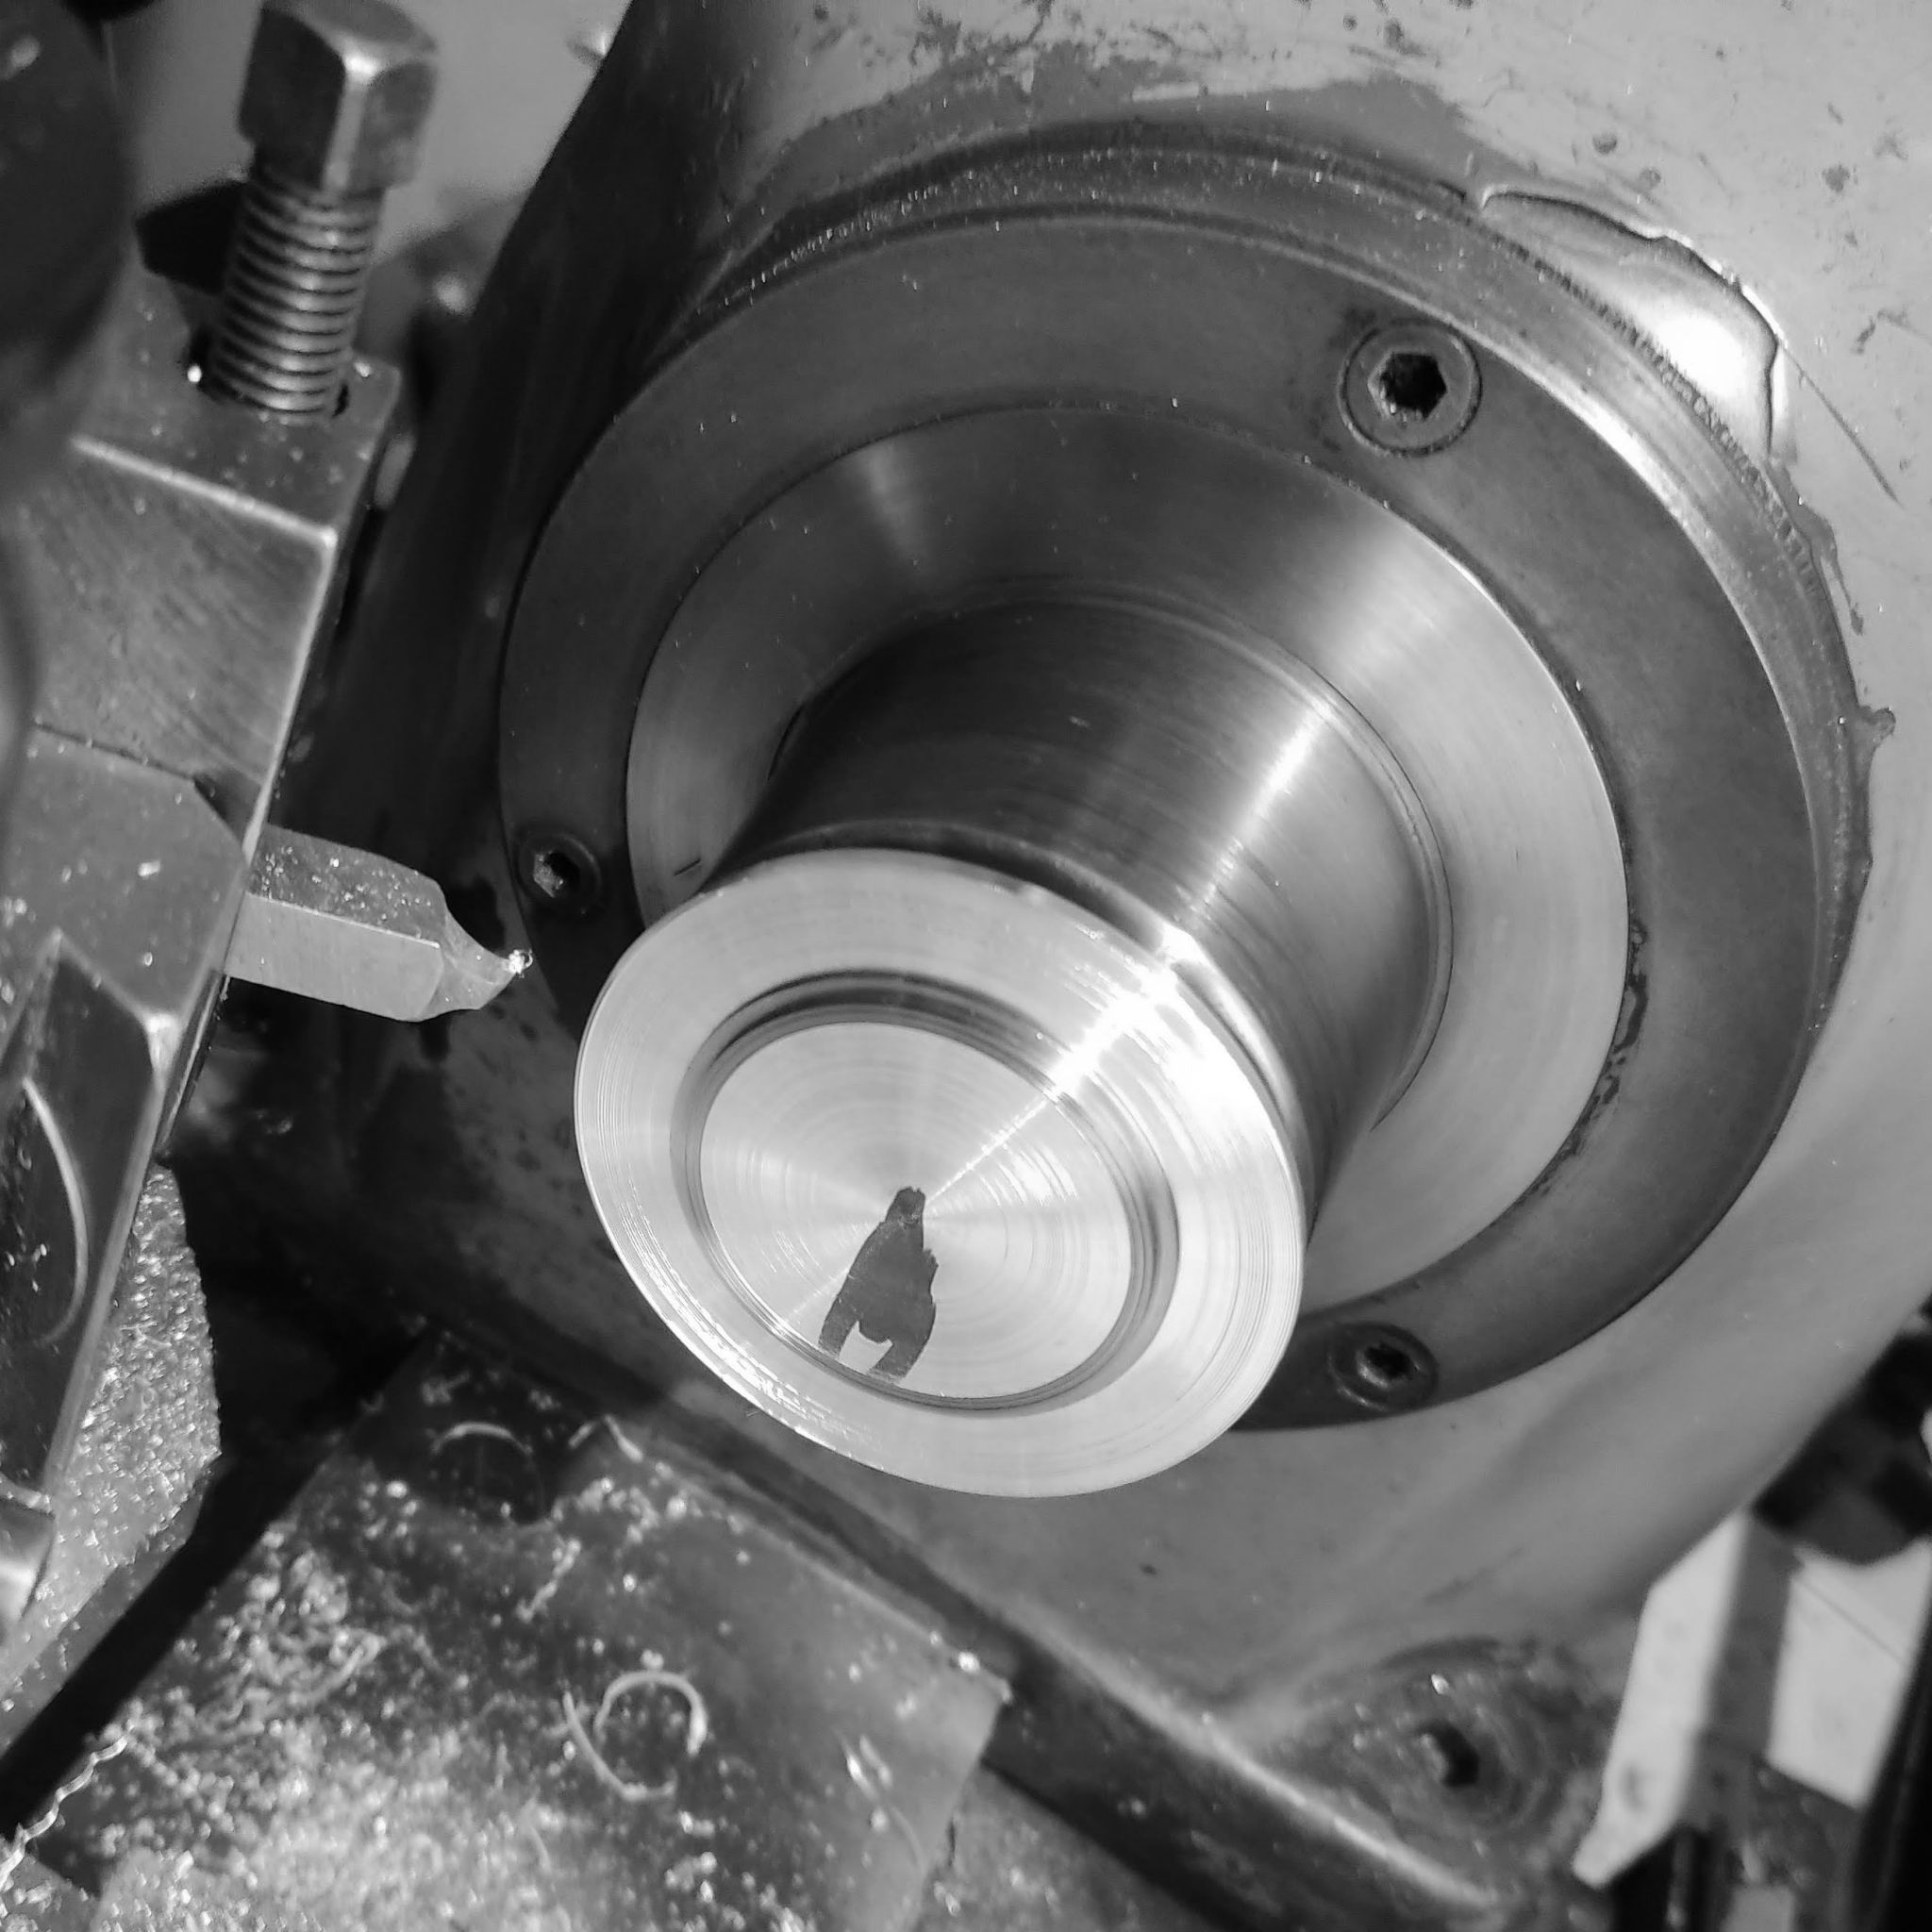 The jig was marked with a rough measure of the interior of the dial diameter, and then a step cut.